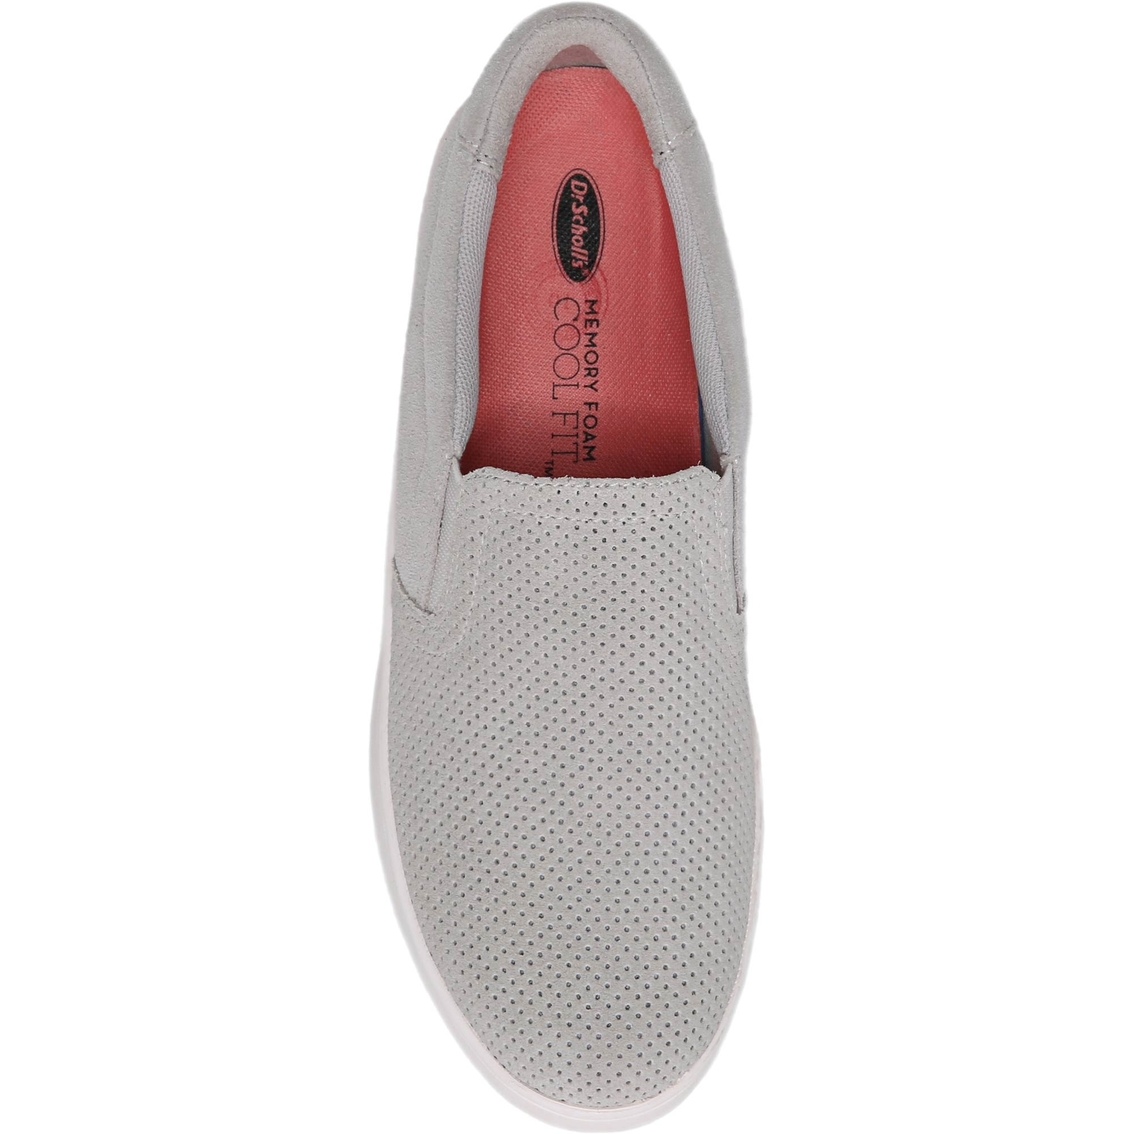 Dr. Scholl's Madison Slip On Sneakers - Image 3 of 4